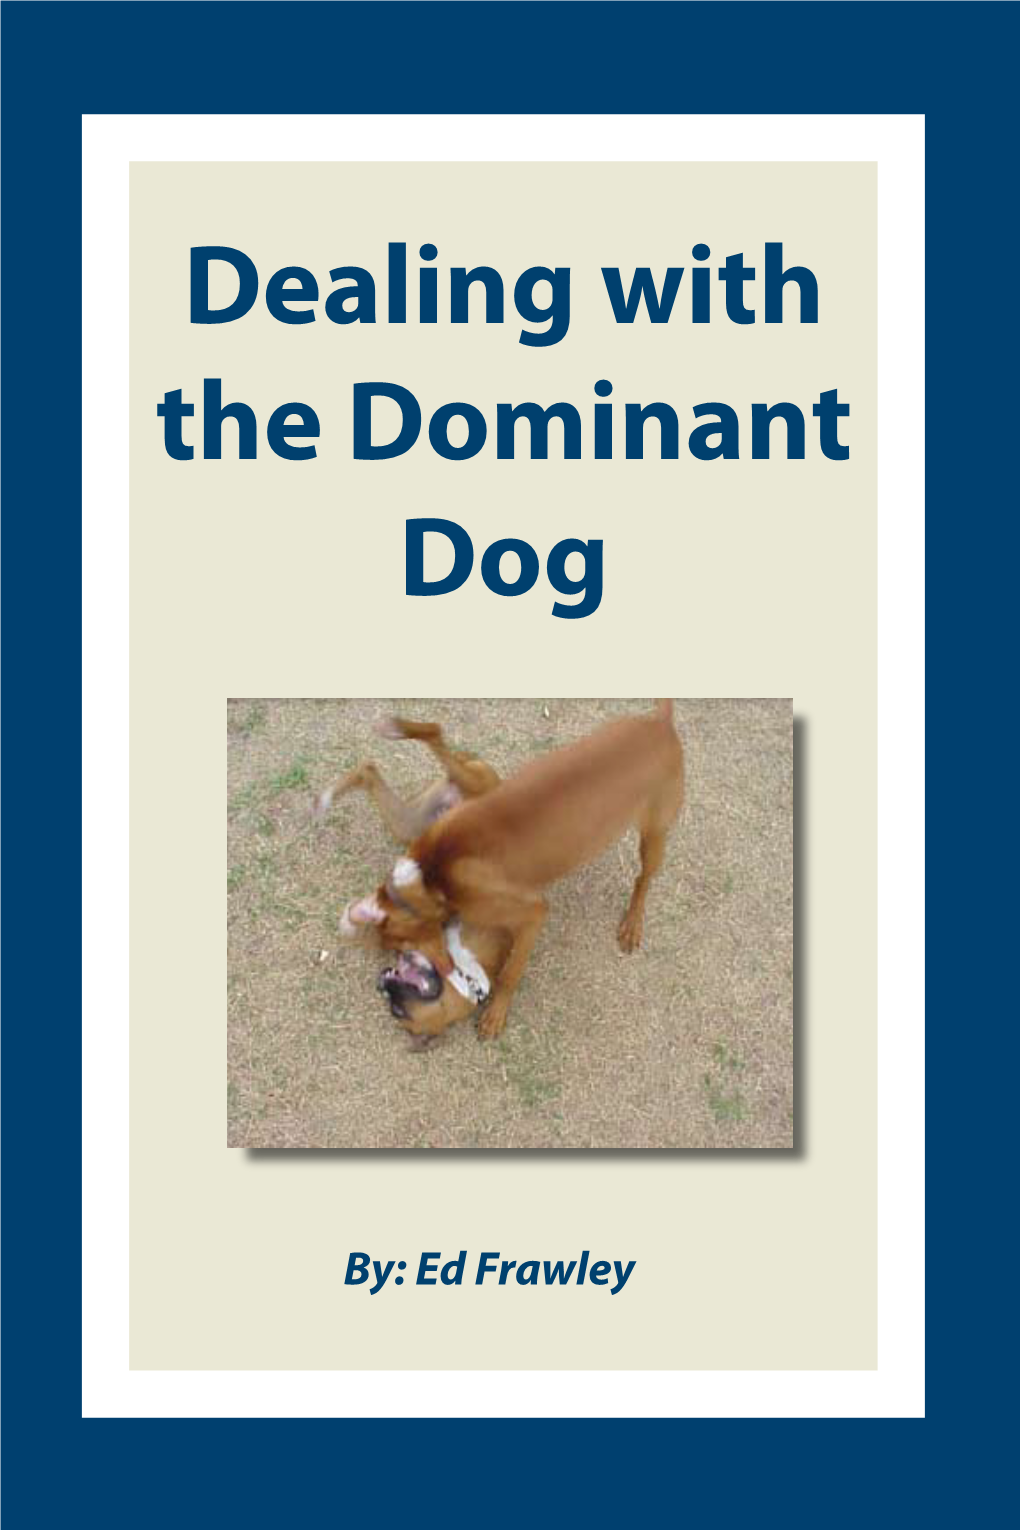 Dealing with the Dominant Dog